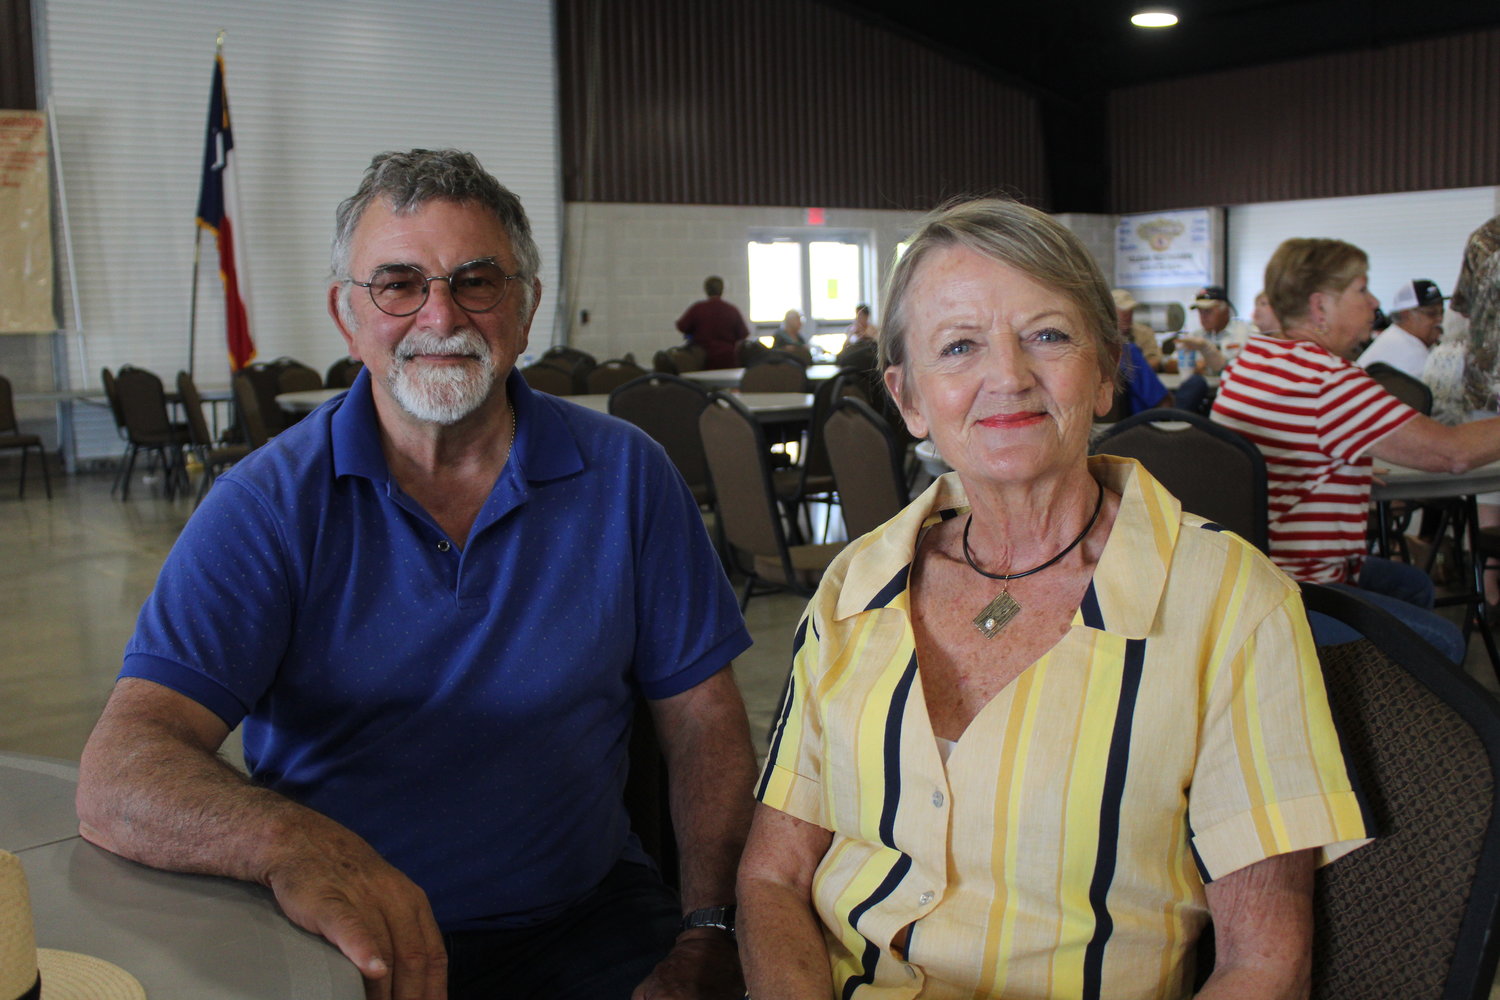 Jane and John Burn, a happily married couple from the great country of Australia, were in town that week to check out Gonzales and test real Texas barbecue. They were selected as judges for the spare rib competition and the chili finals..